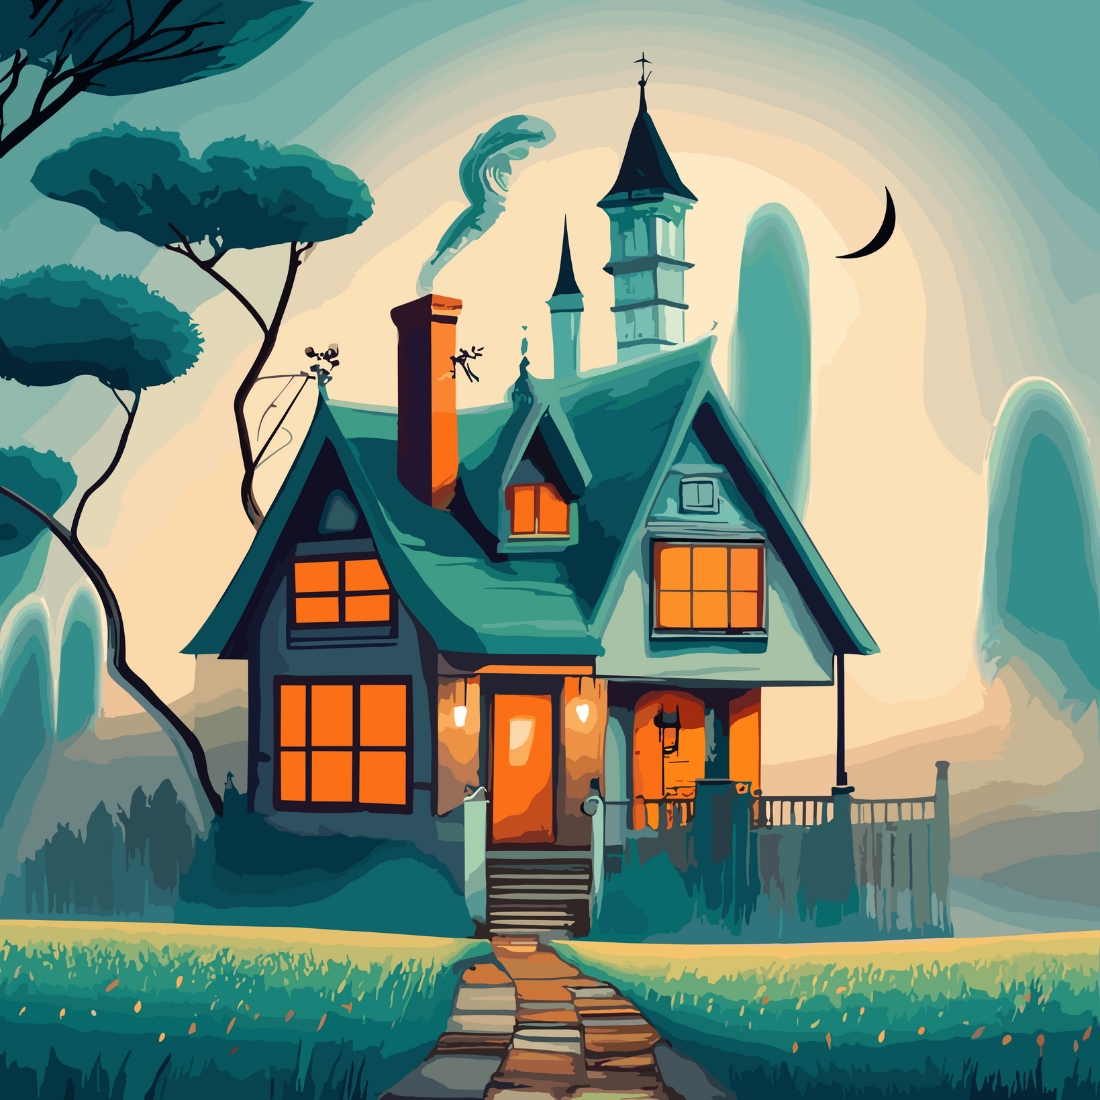 A ghostly fog surrounds the house, lending it an otherworldly and mysterious atmosphere preview image.